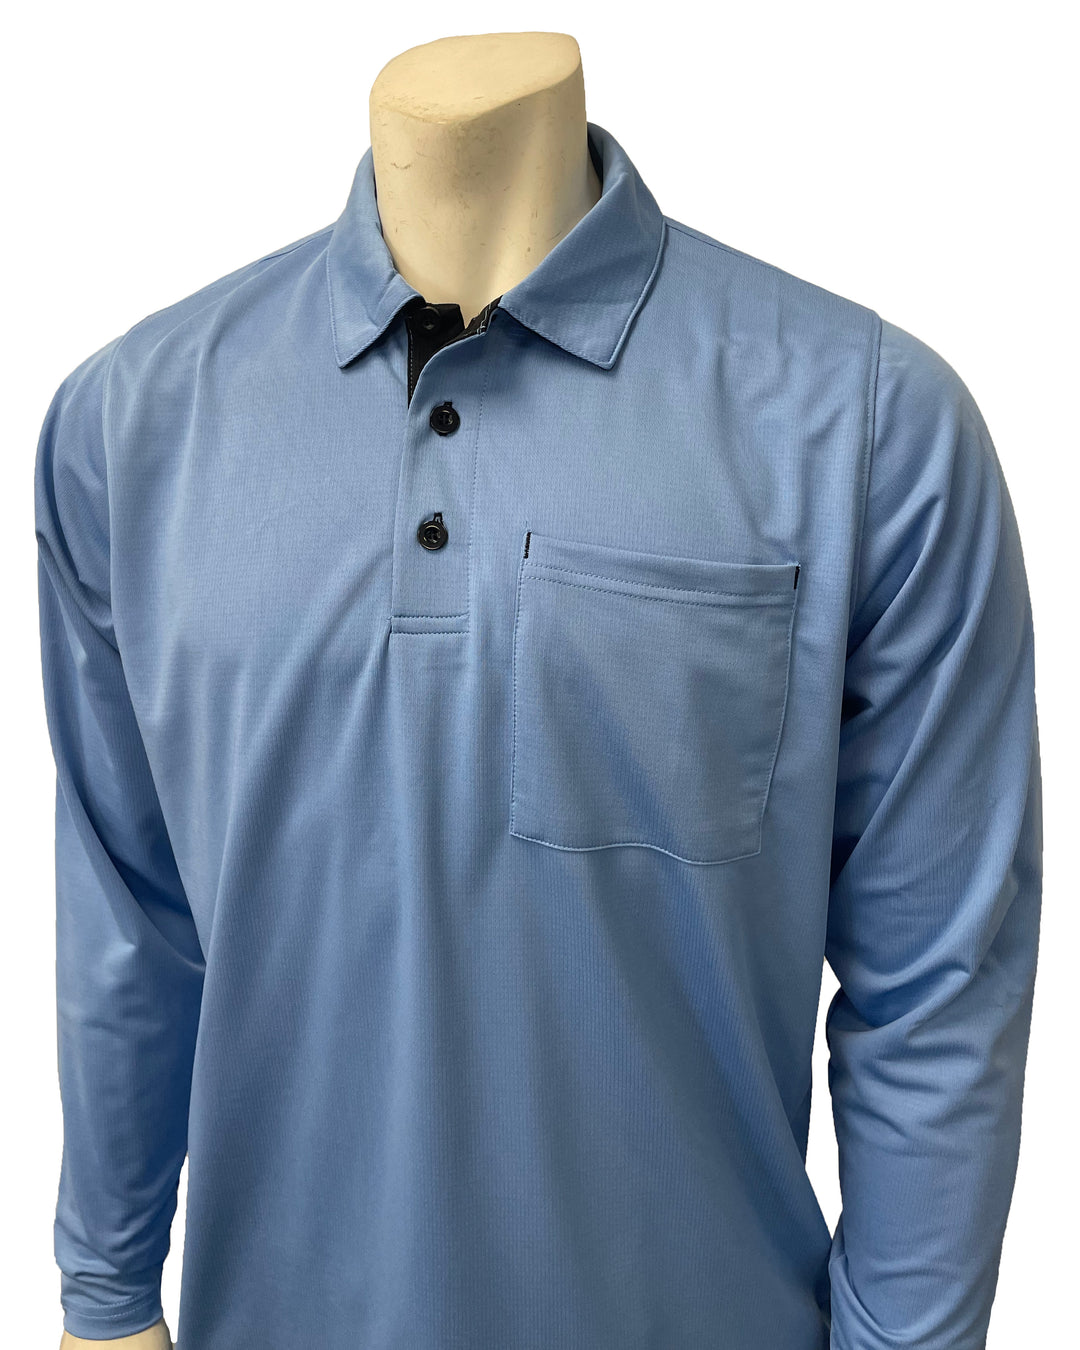 BBS350 - Smitty "New Major League" Style Long Sleeve Umpire Shirts - Available in Black and Blue